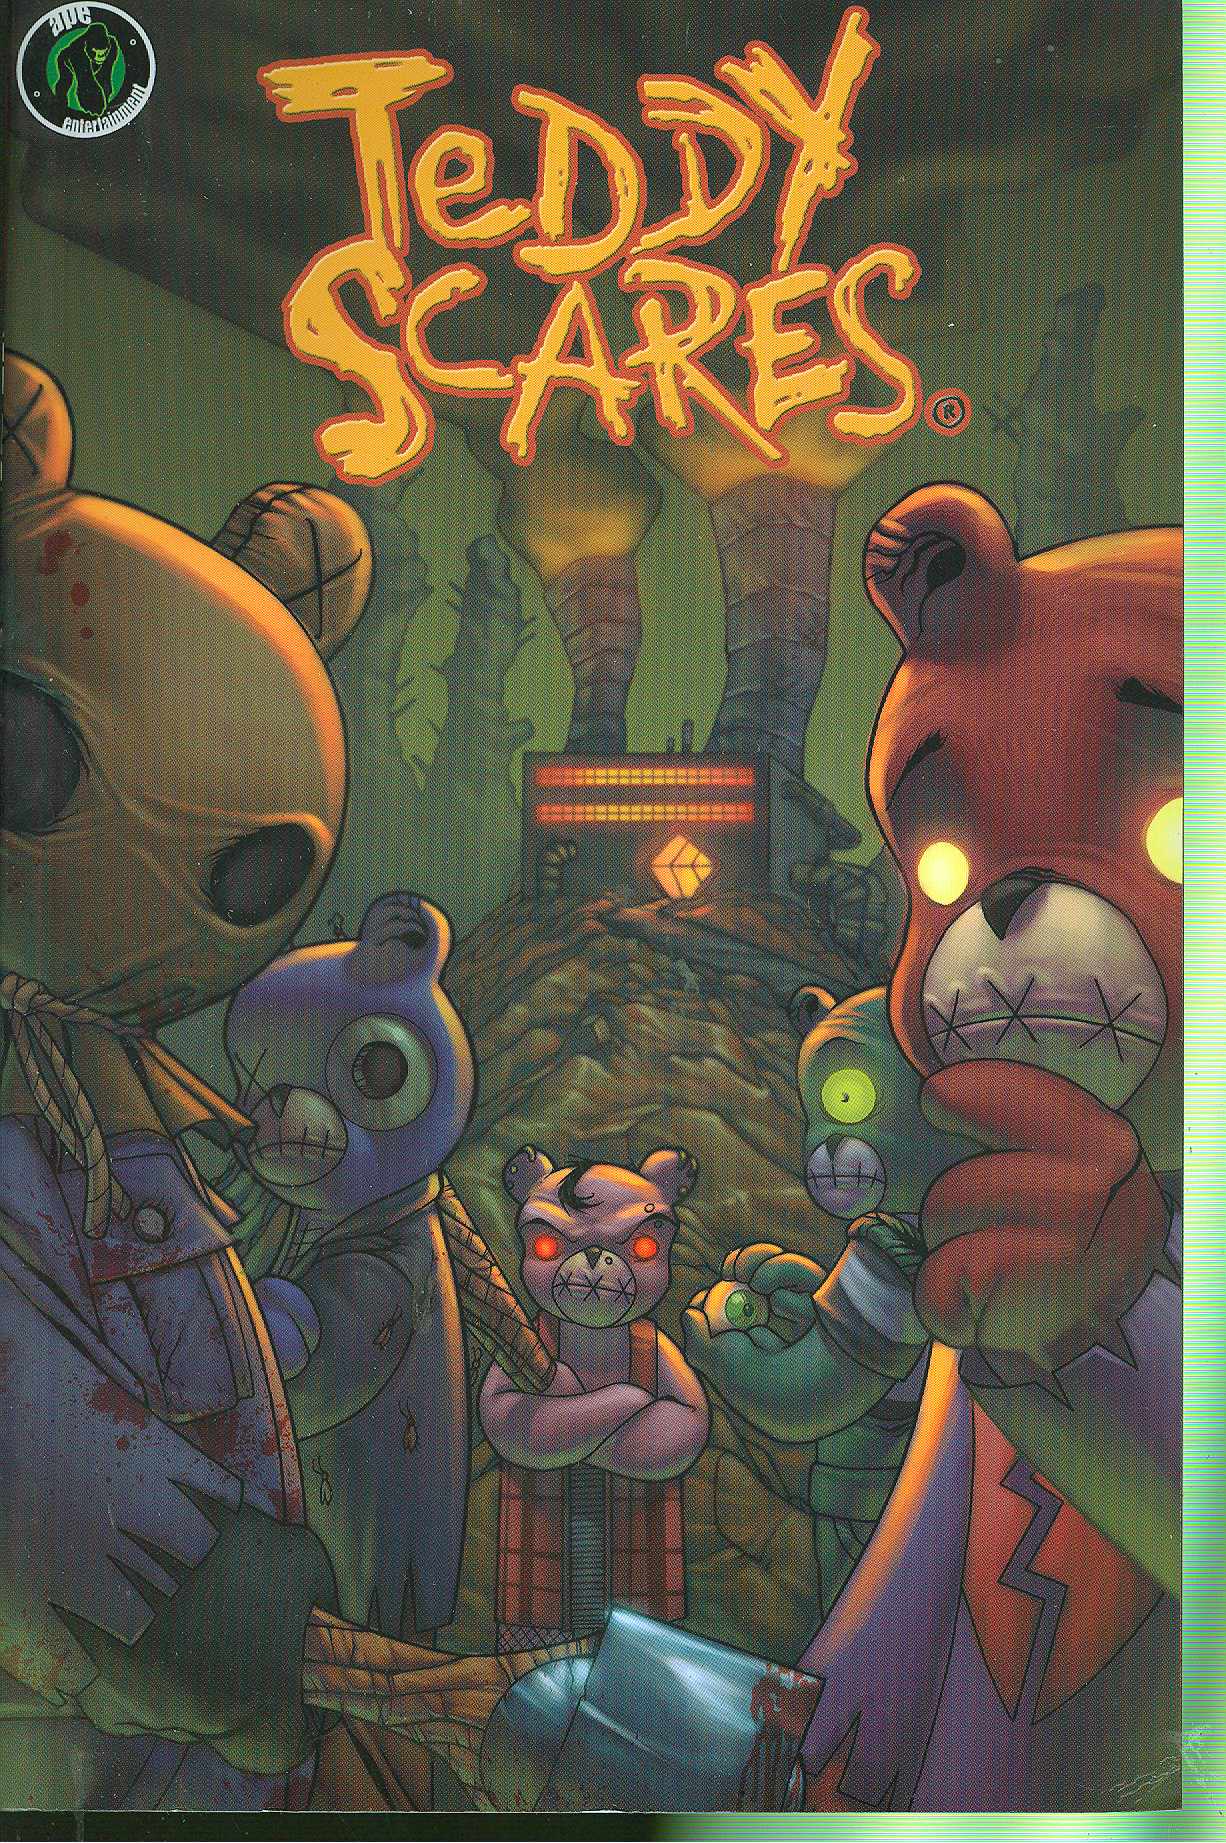 Poster Teddy Scares